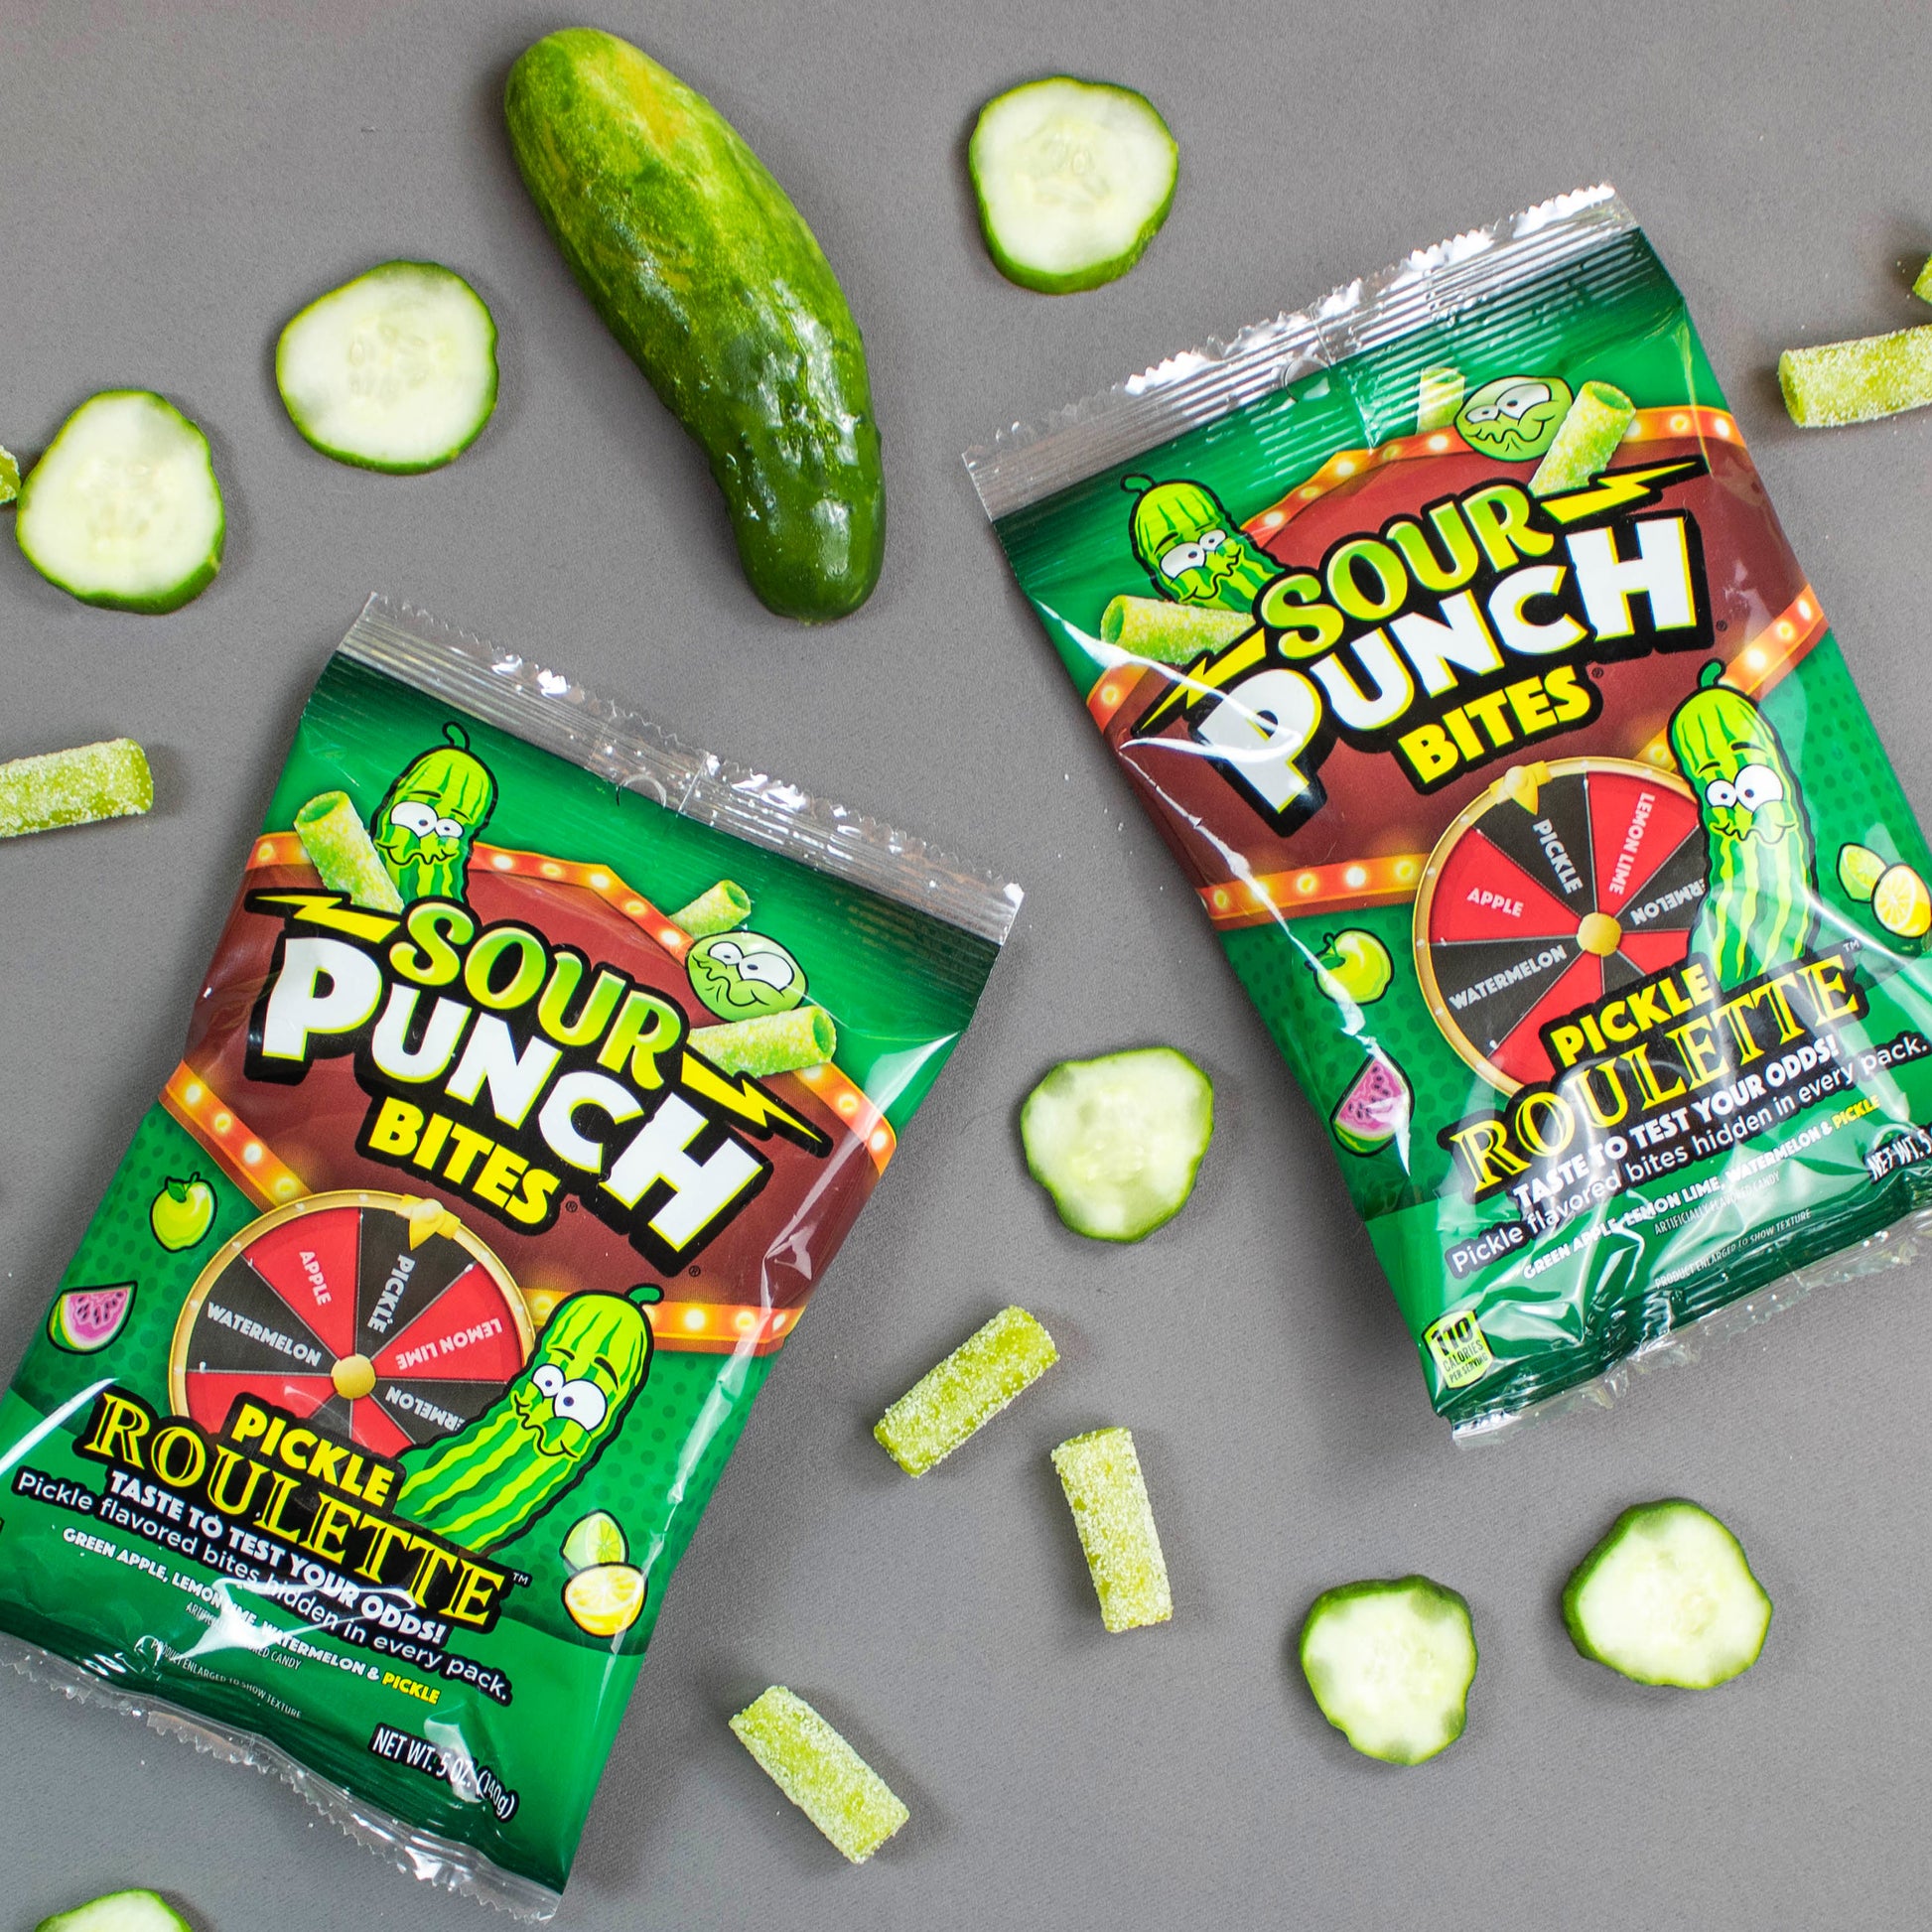 SOUR PUNCH Pickle Roulette Bites with roulette game pieces and real pickles